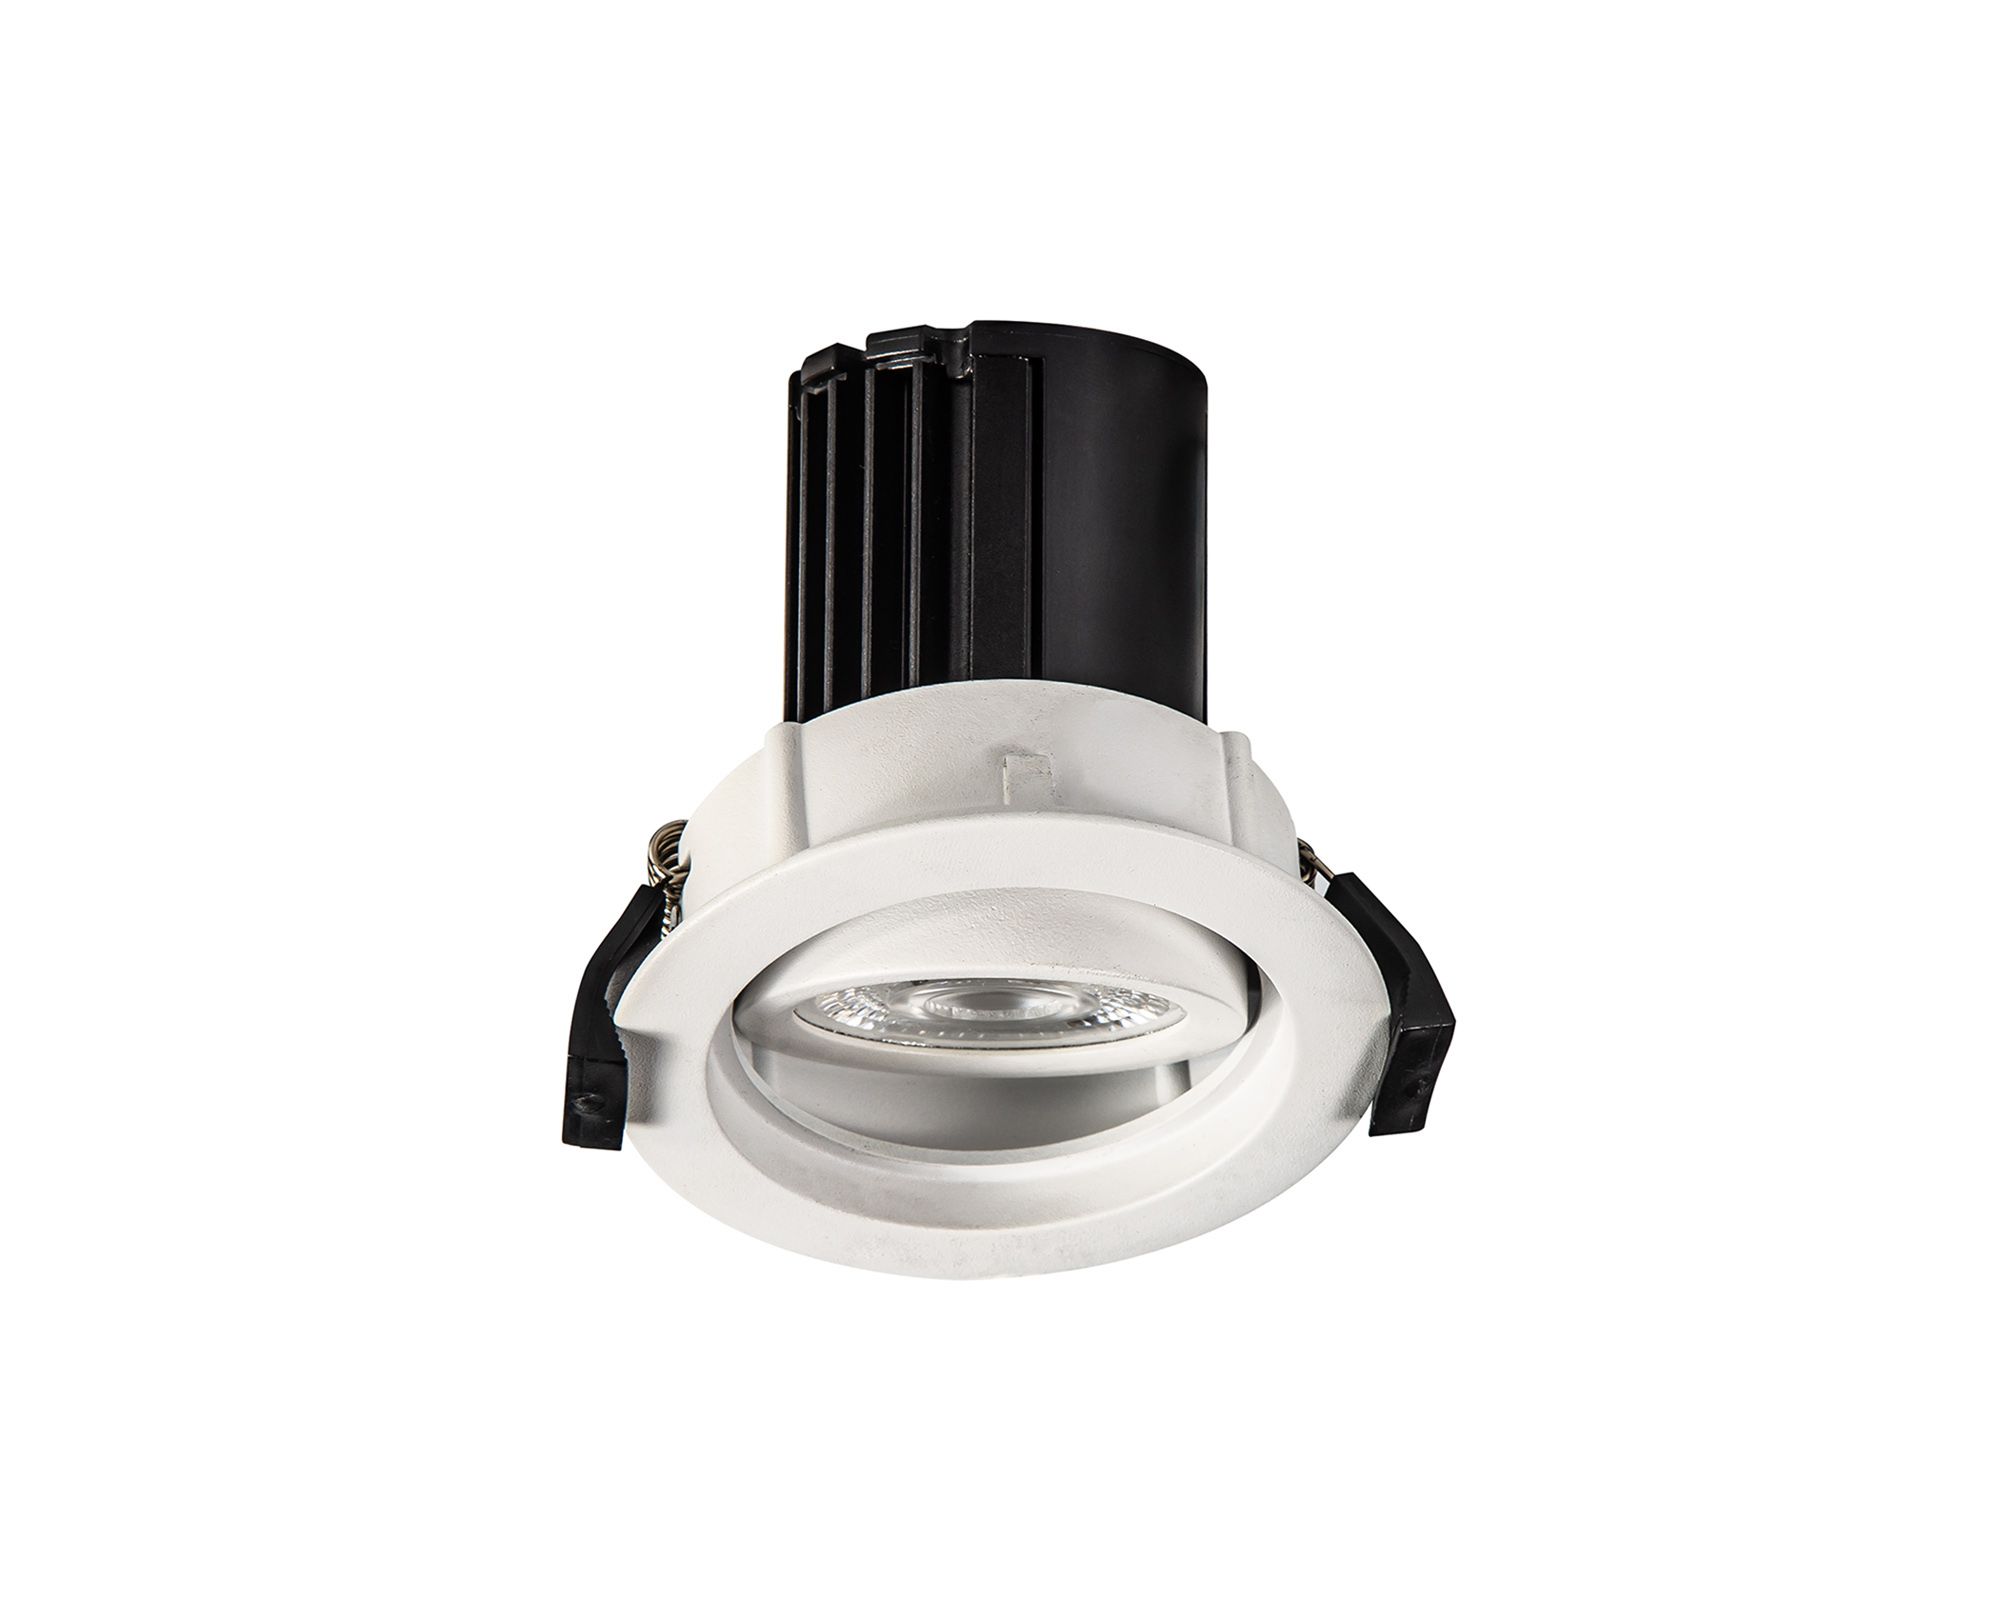 DM201240  Beppe A 10 Tridonic powered 10W 2700K 750lm 12° CRI>90 LED Engine White Stepped Adjustable Recessed Spotlight, IP20